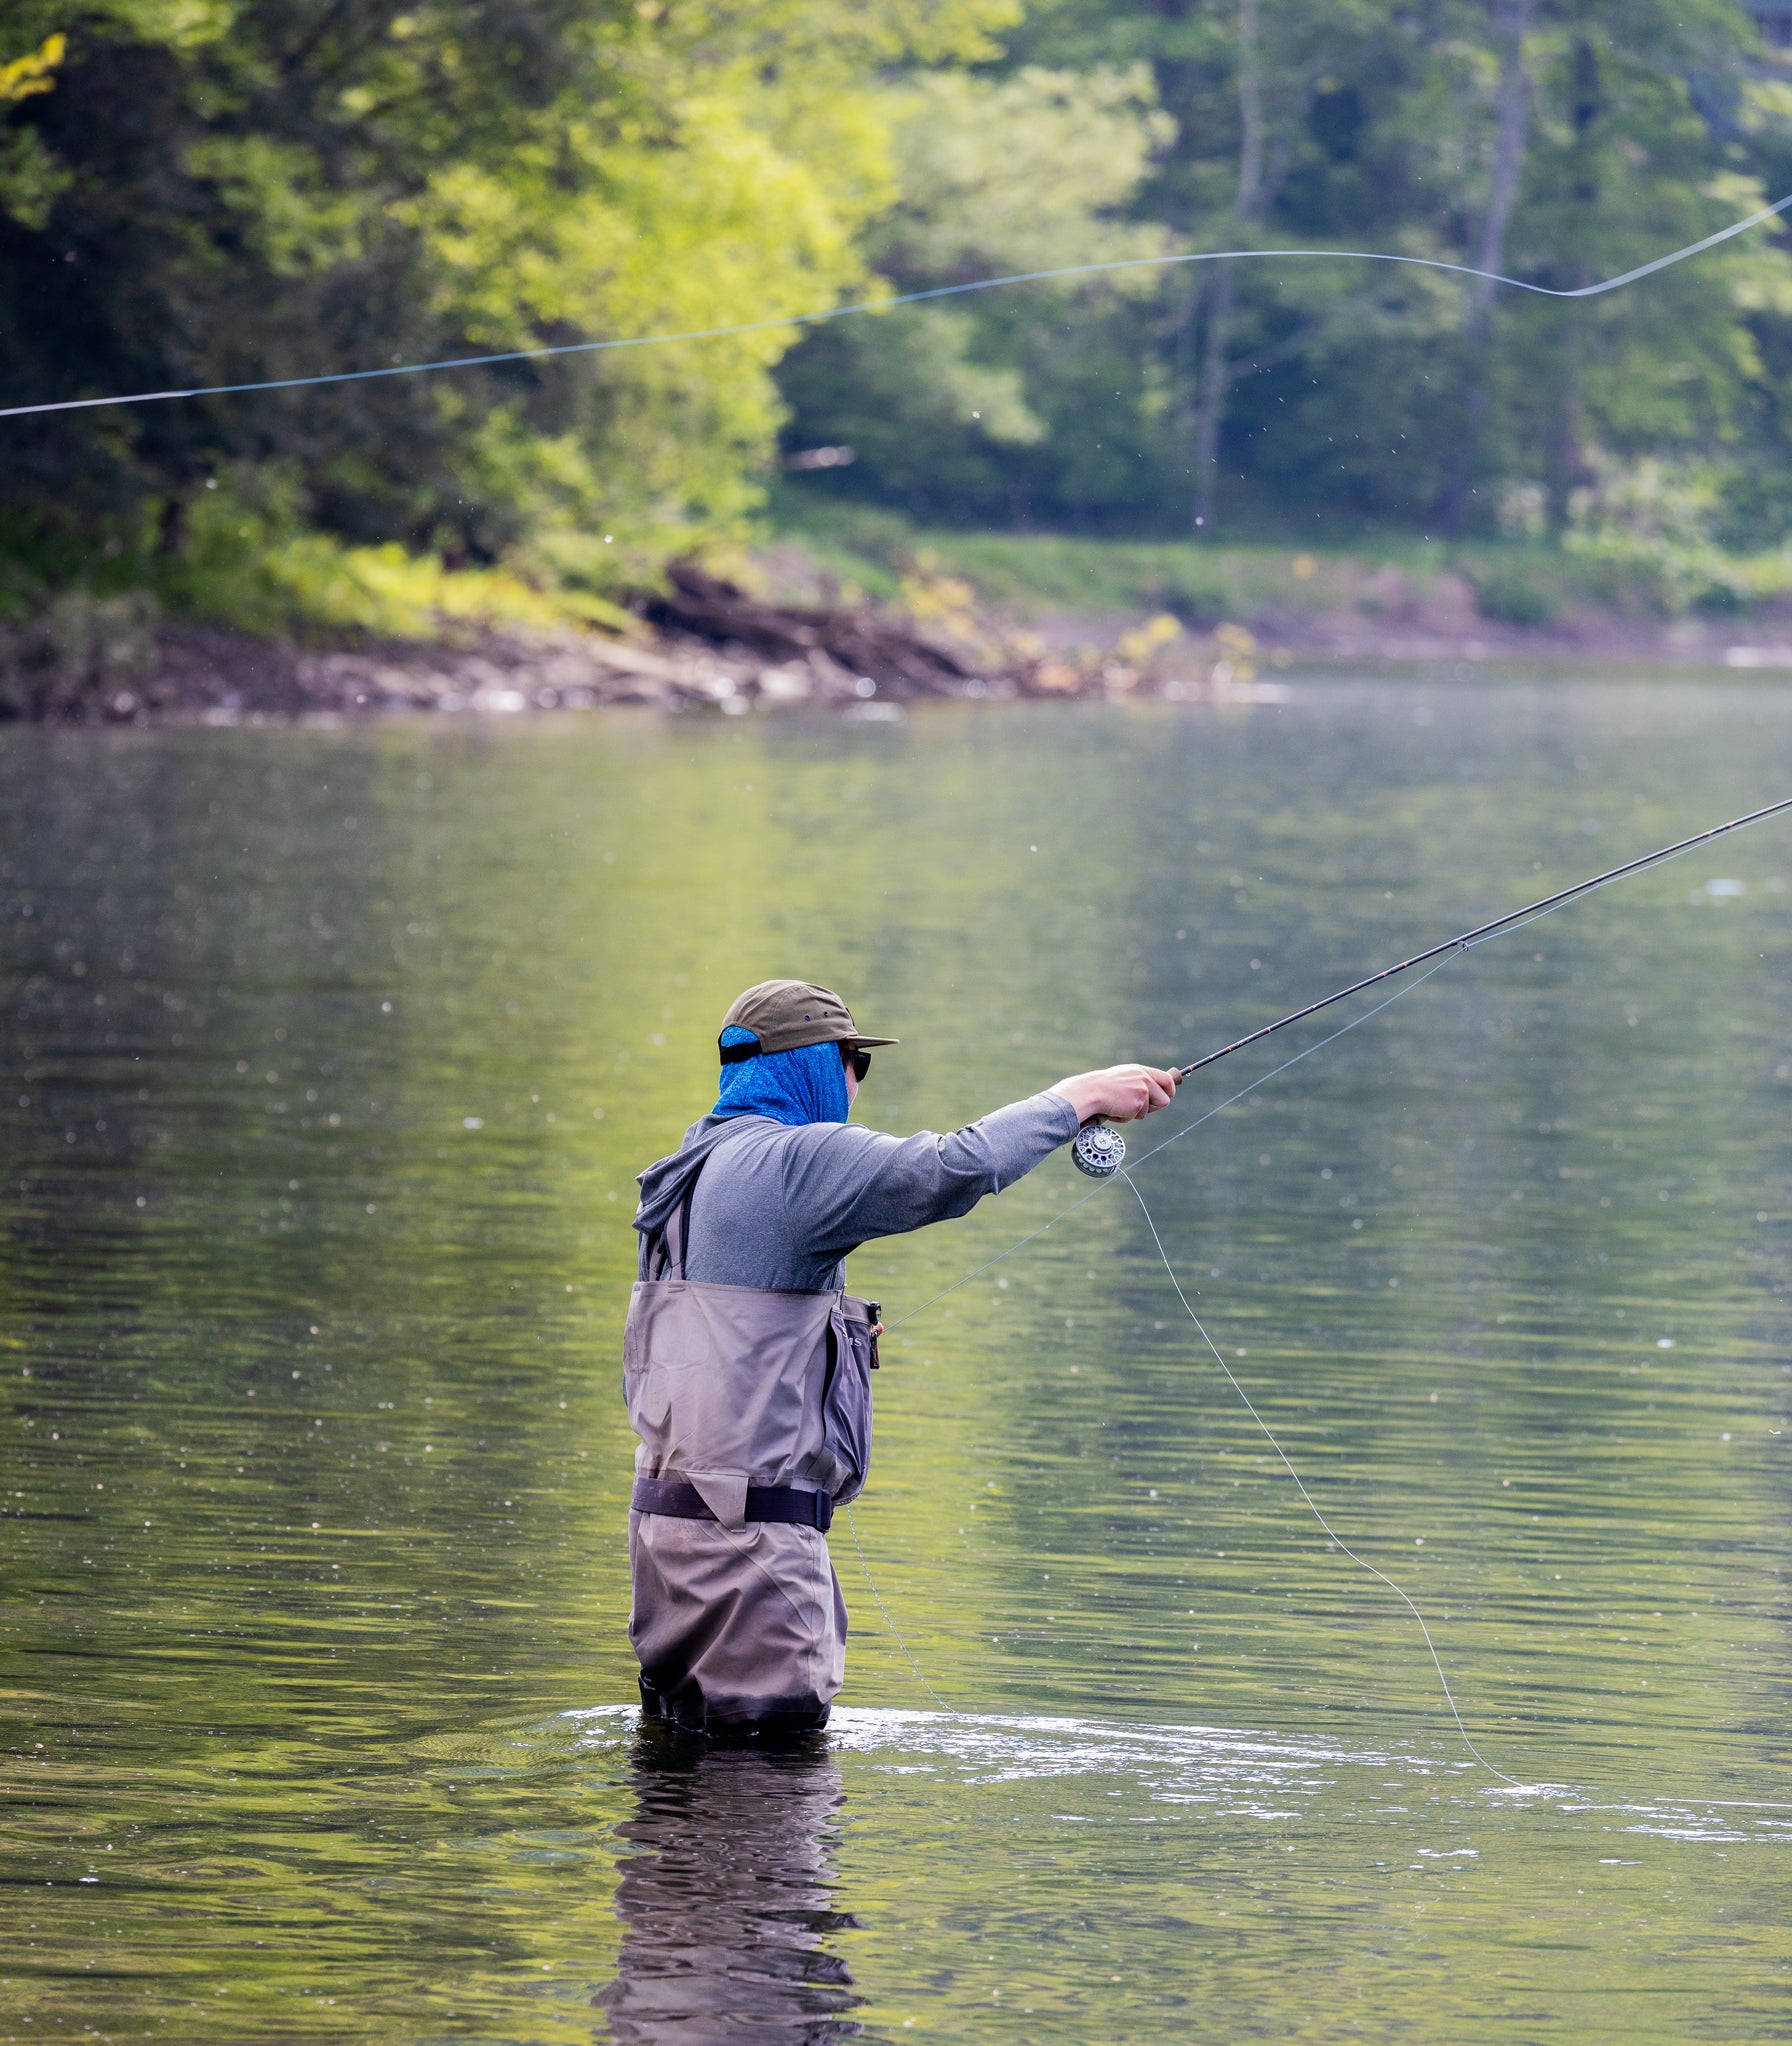 Fisherman casting out his line while dry fly fishing